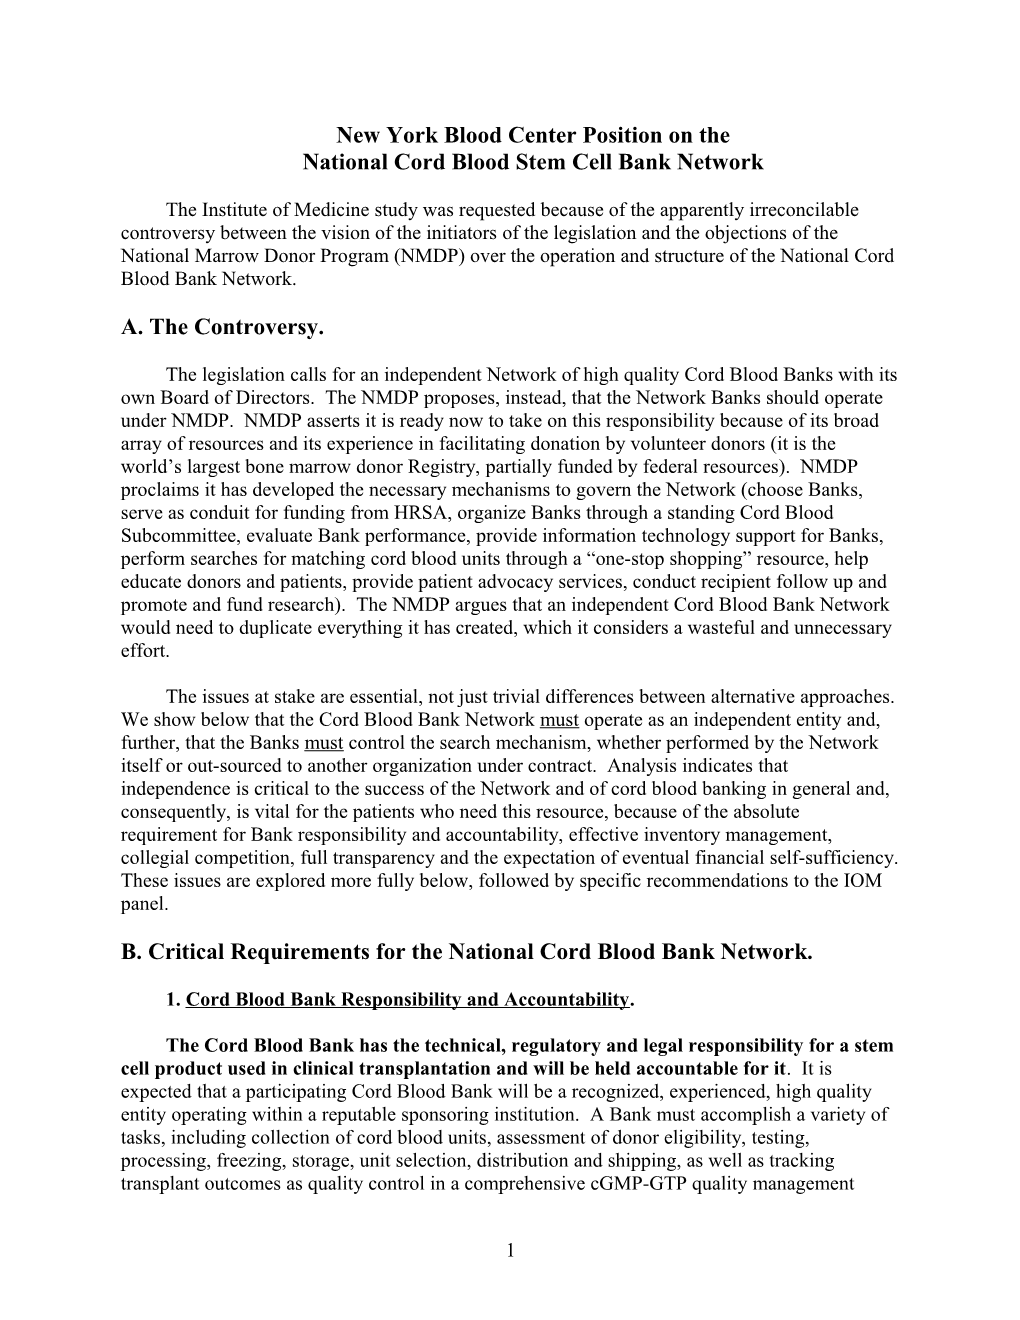 A National Cord Blood Stem Cell Bank Network